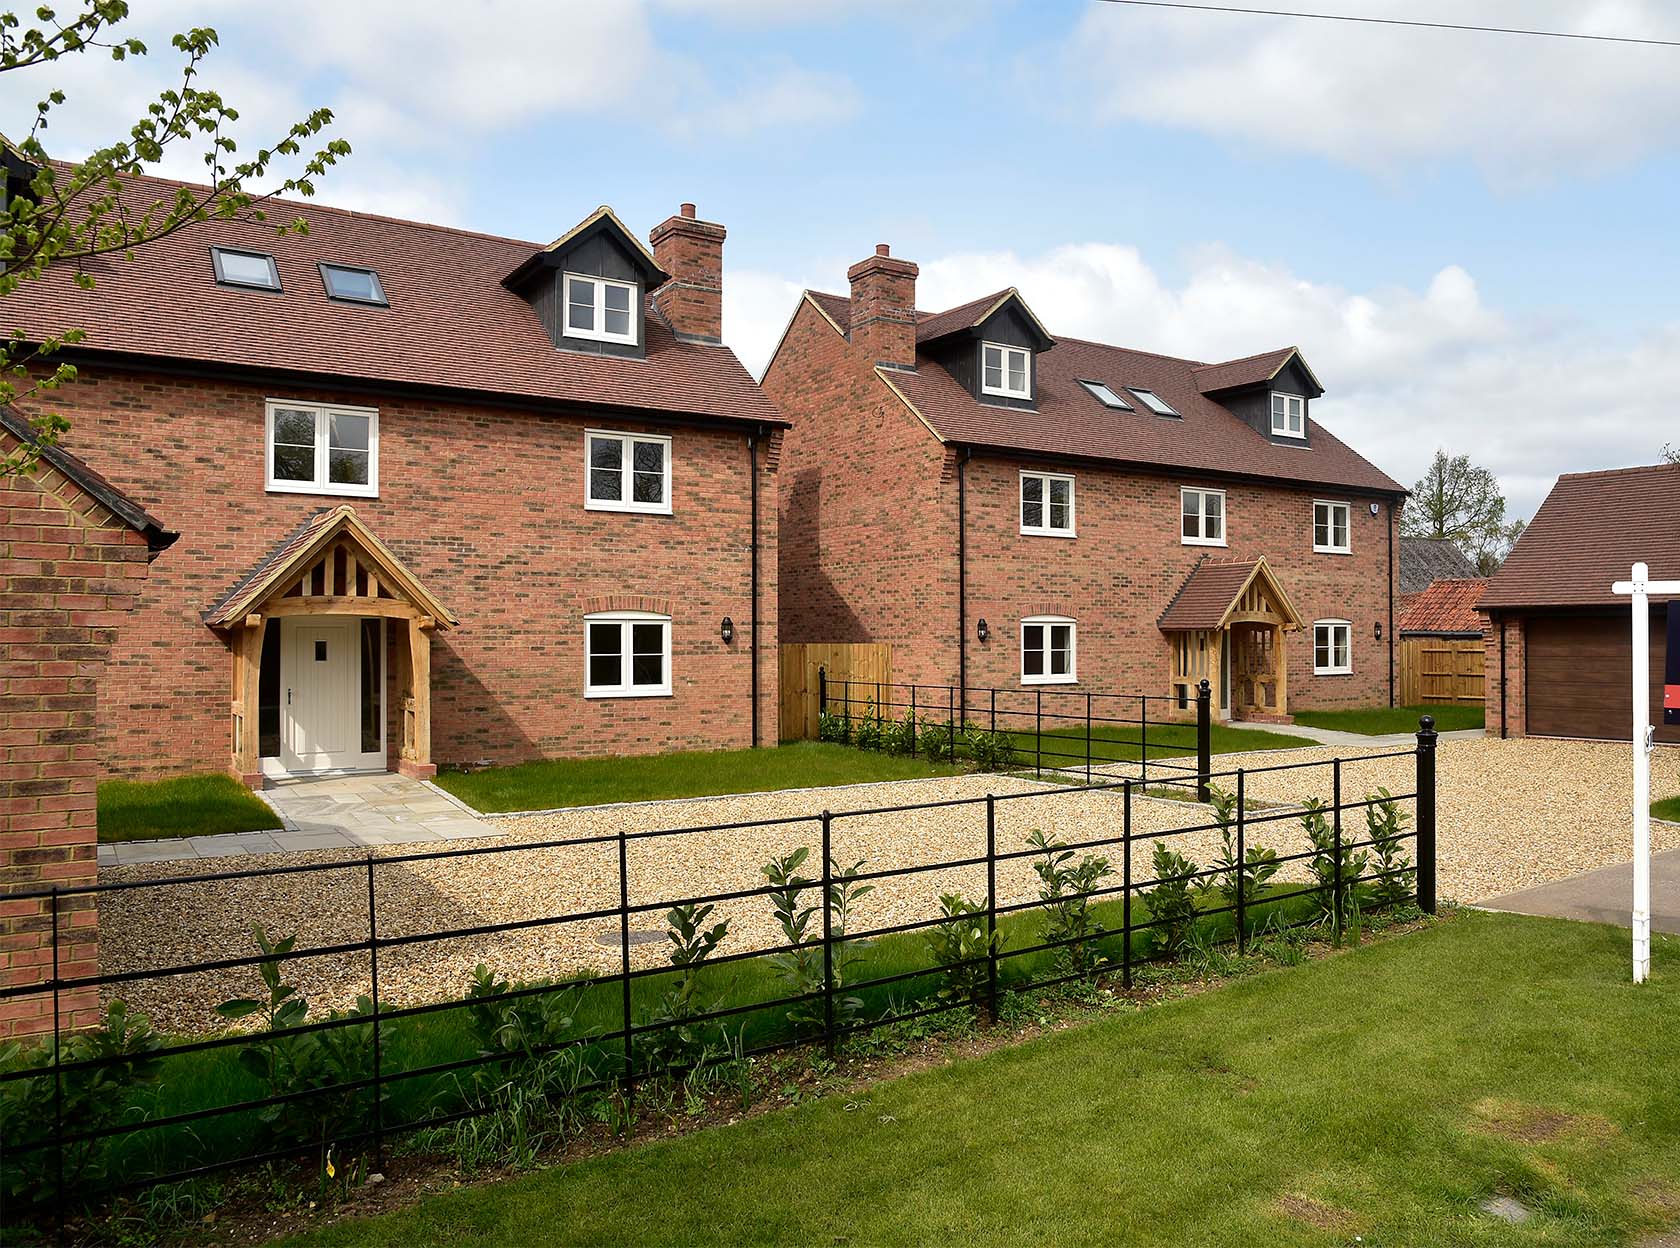 Two symmetrical new properties in rural Bedfordshire